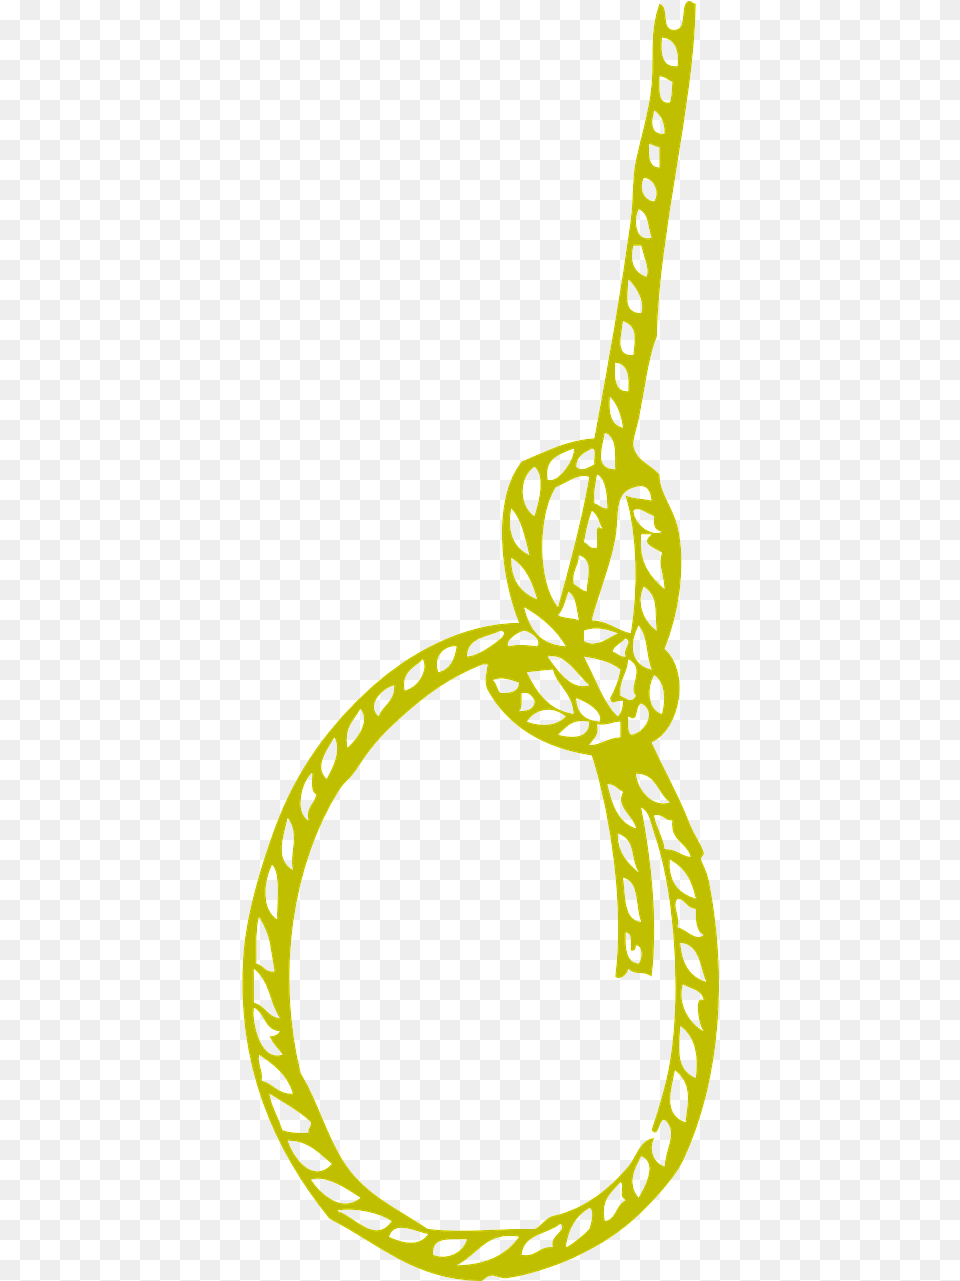 Knot Yellow Rope Picture Knotted Rope Cartoon, Hockey, Ice Hockey, Ice Hockey Stick, Rink Free Png